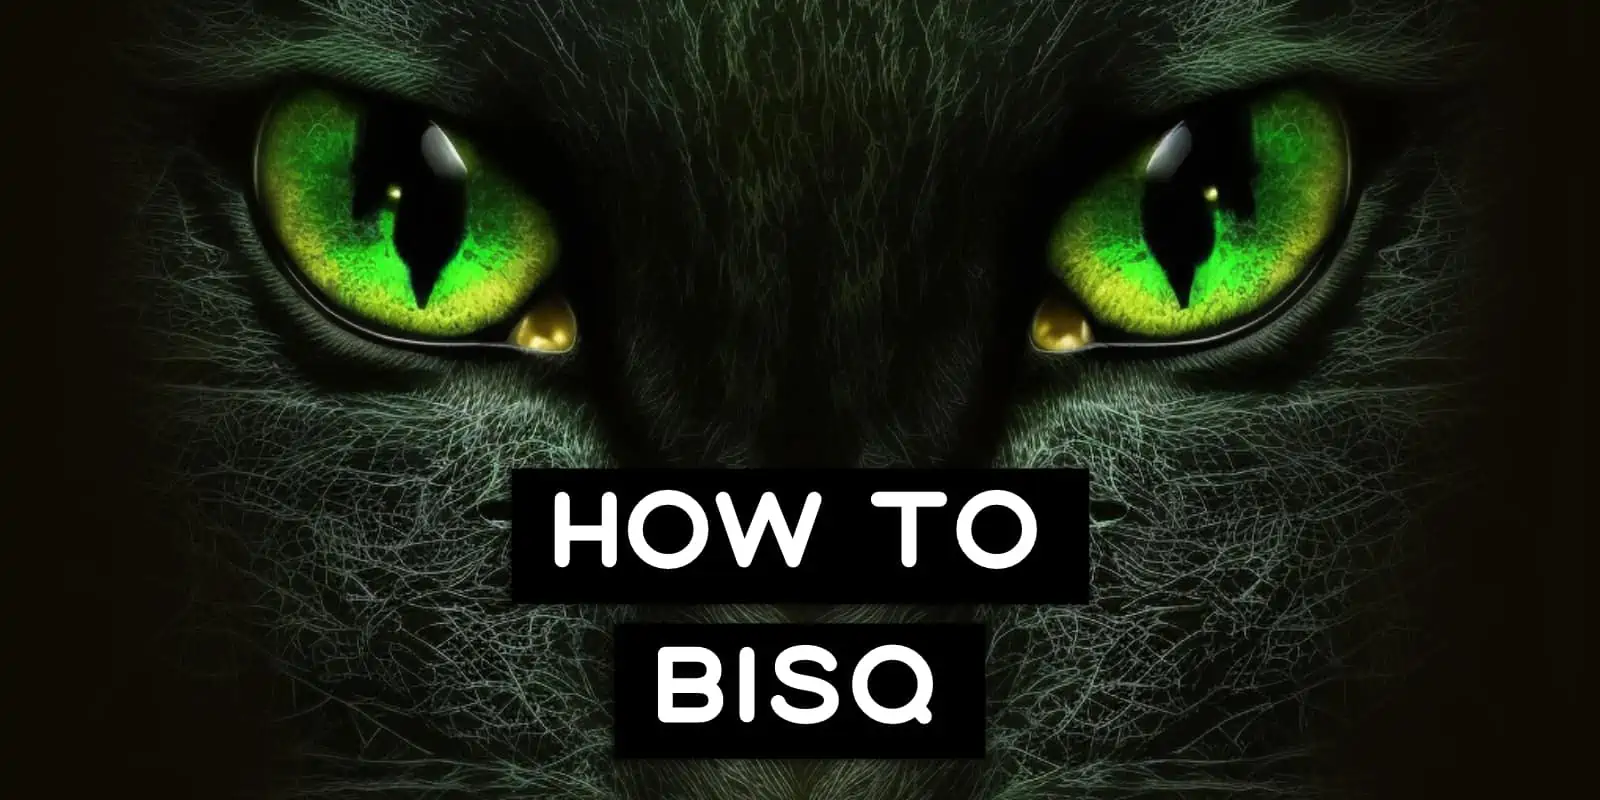 How To Buy Bitcoin On Bisq